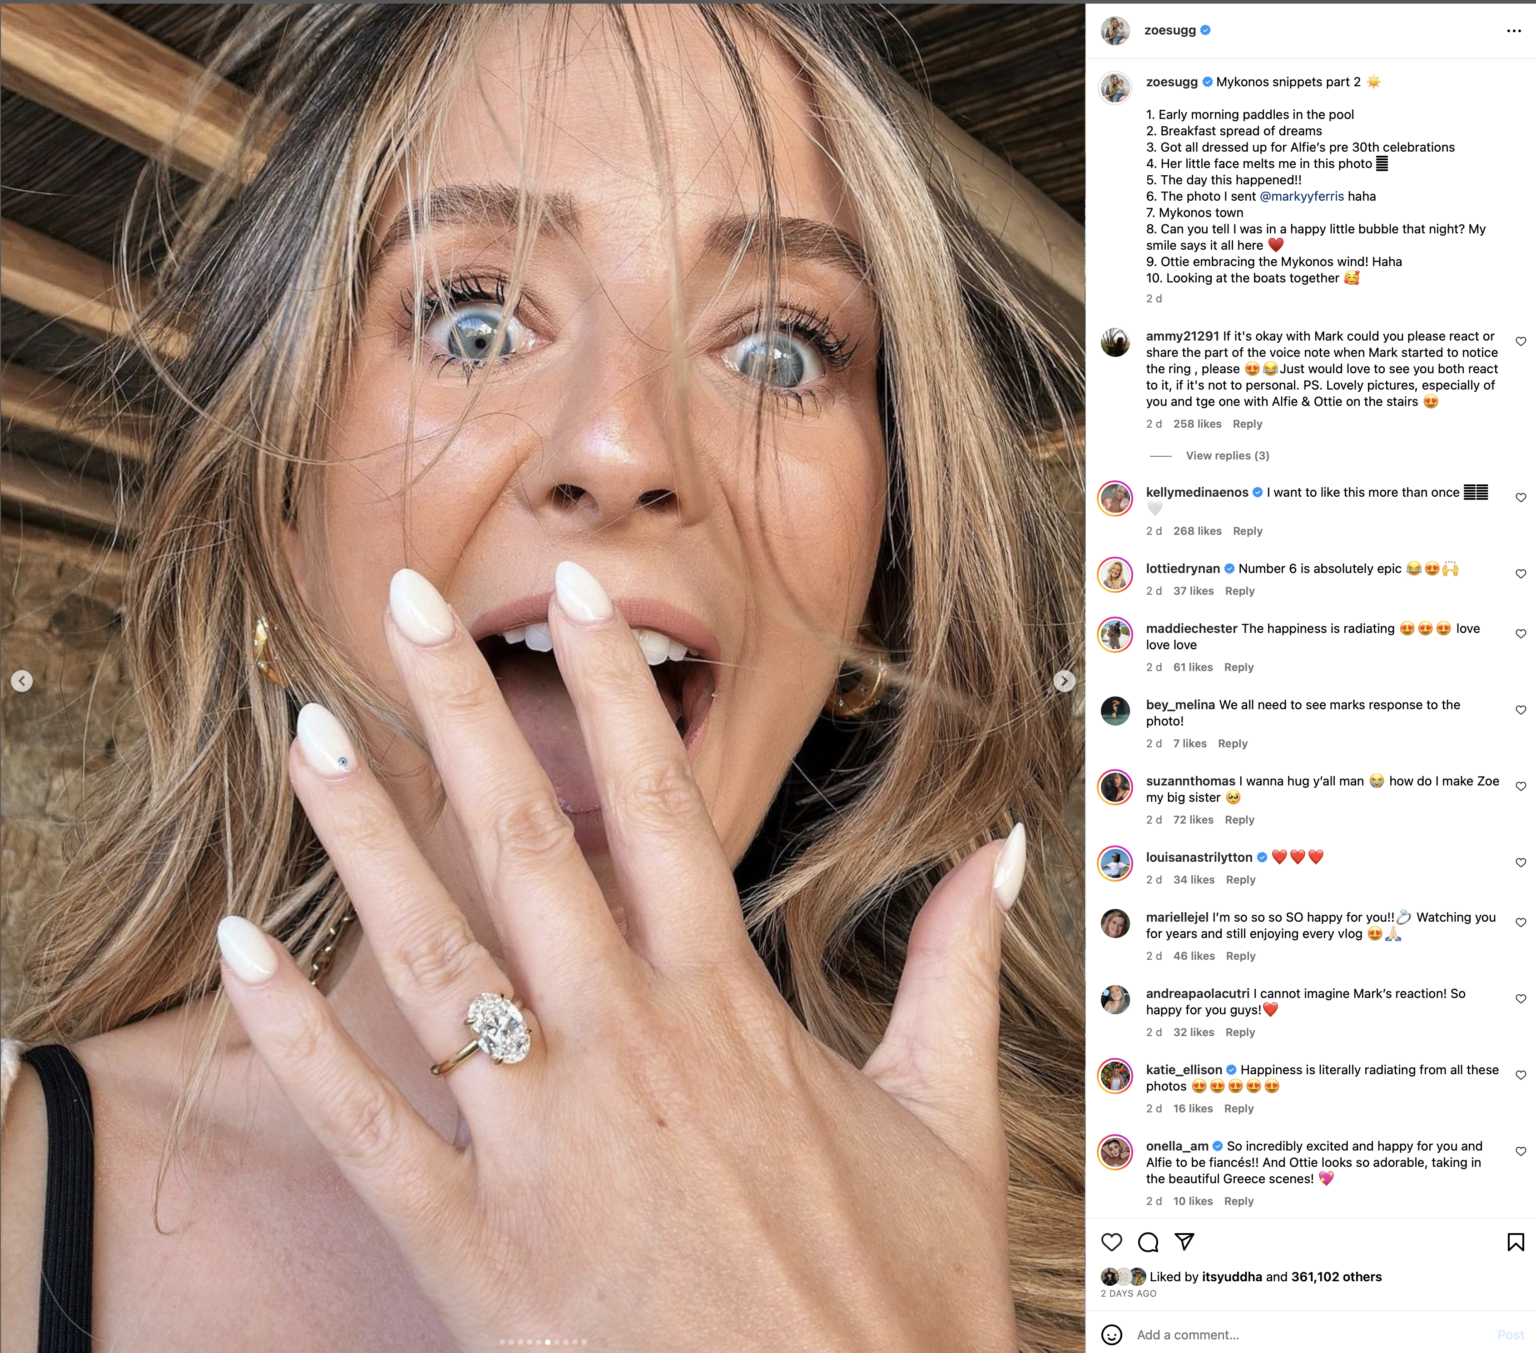 Zoe Sugg showing her engagement ring to the camera on her hand